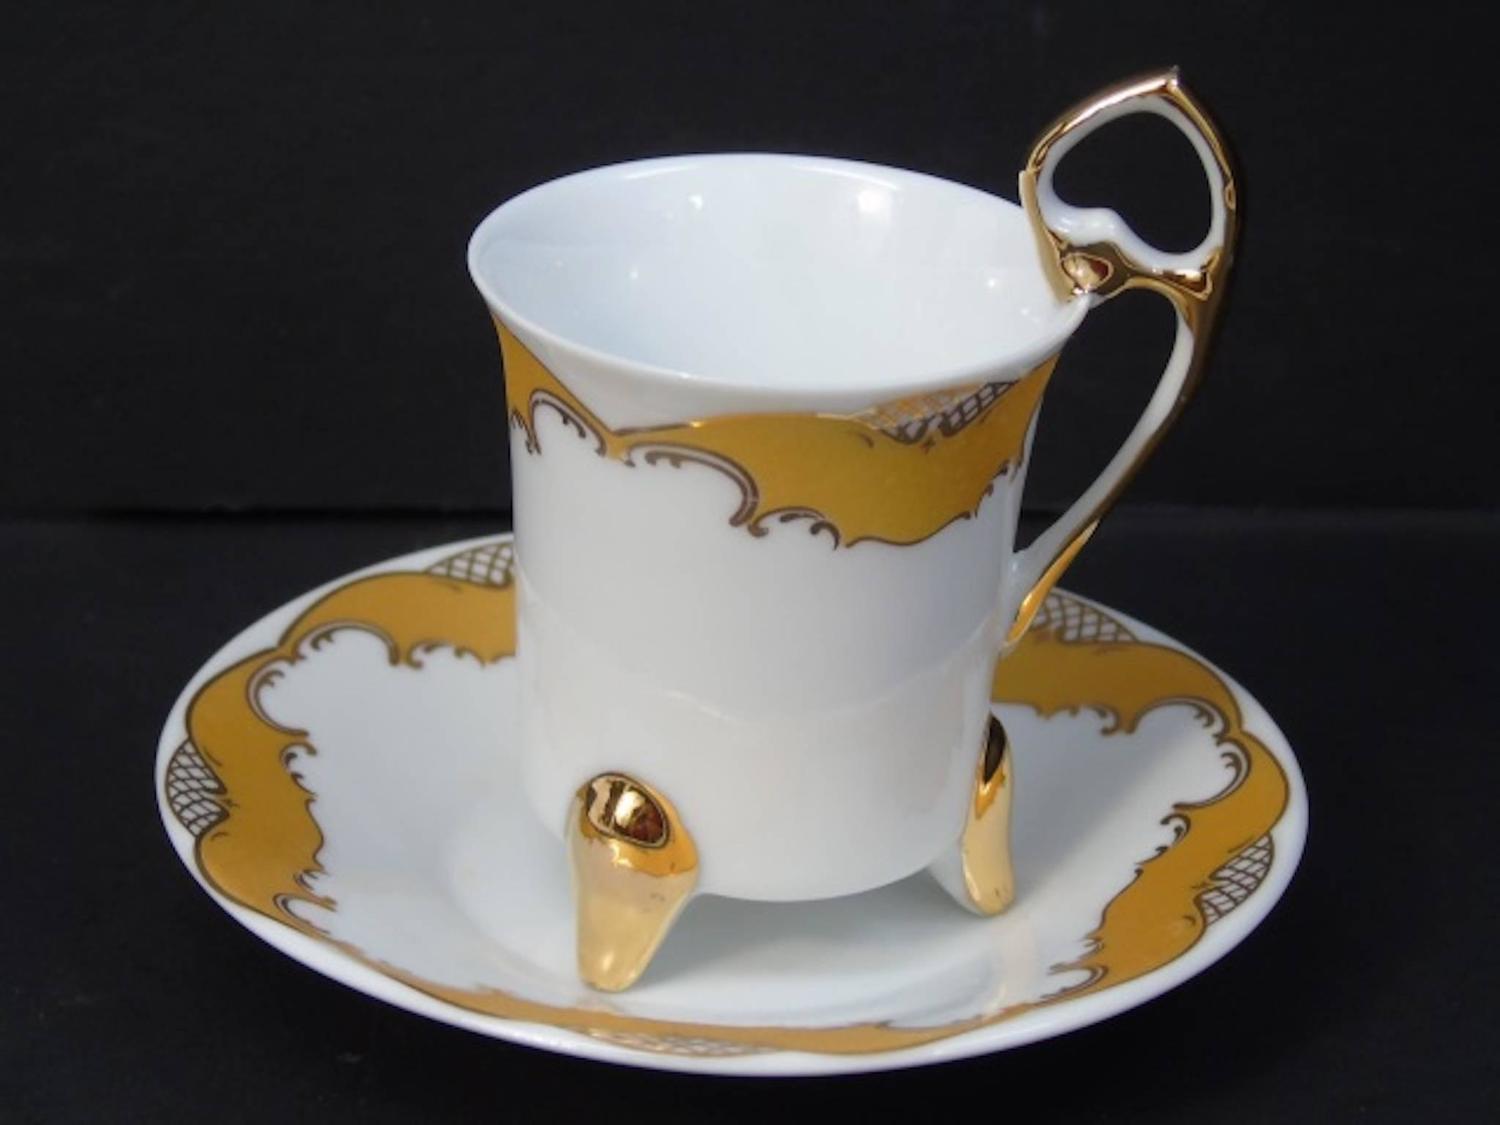 Set of Six Fine Porcelain Demitasse Service Cups and Saucers Gold 